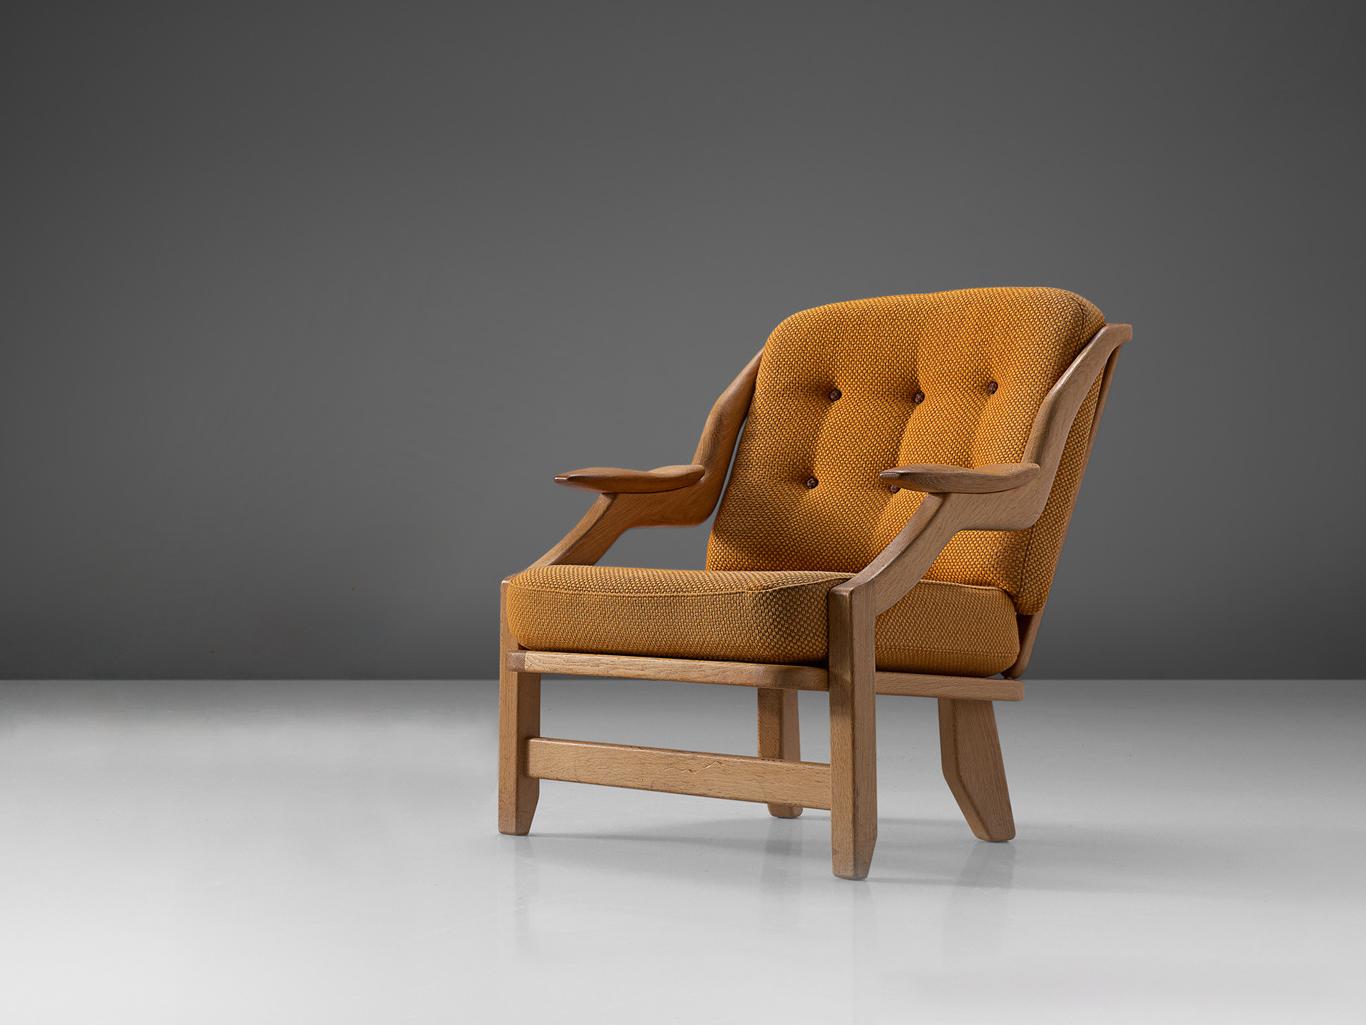 Guillerme et Chambron for Votre Maison, lounge chair, model 'Gregoire', orange wool upholstery, oak, France, 1960s

Comfortable lounge chair designed by Guillerme and Chambron. These chairs have a very interesting shape looking from the side. The